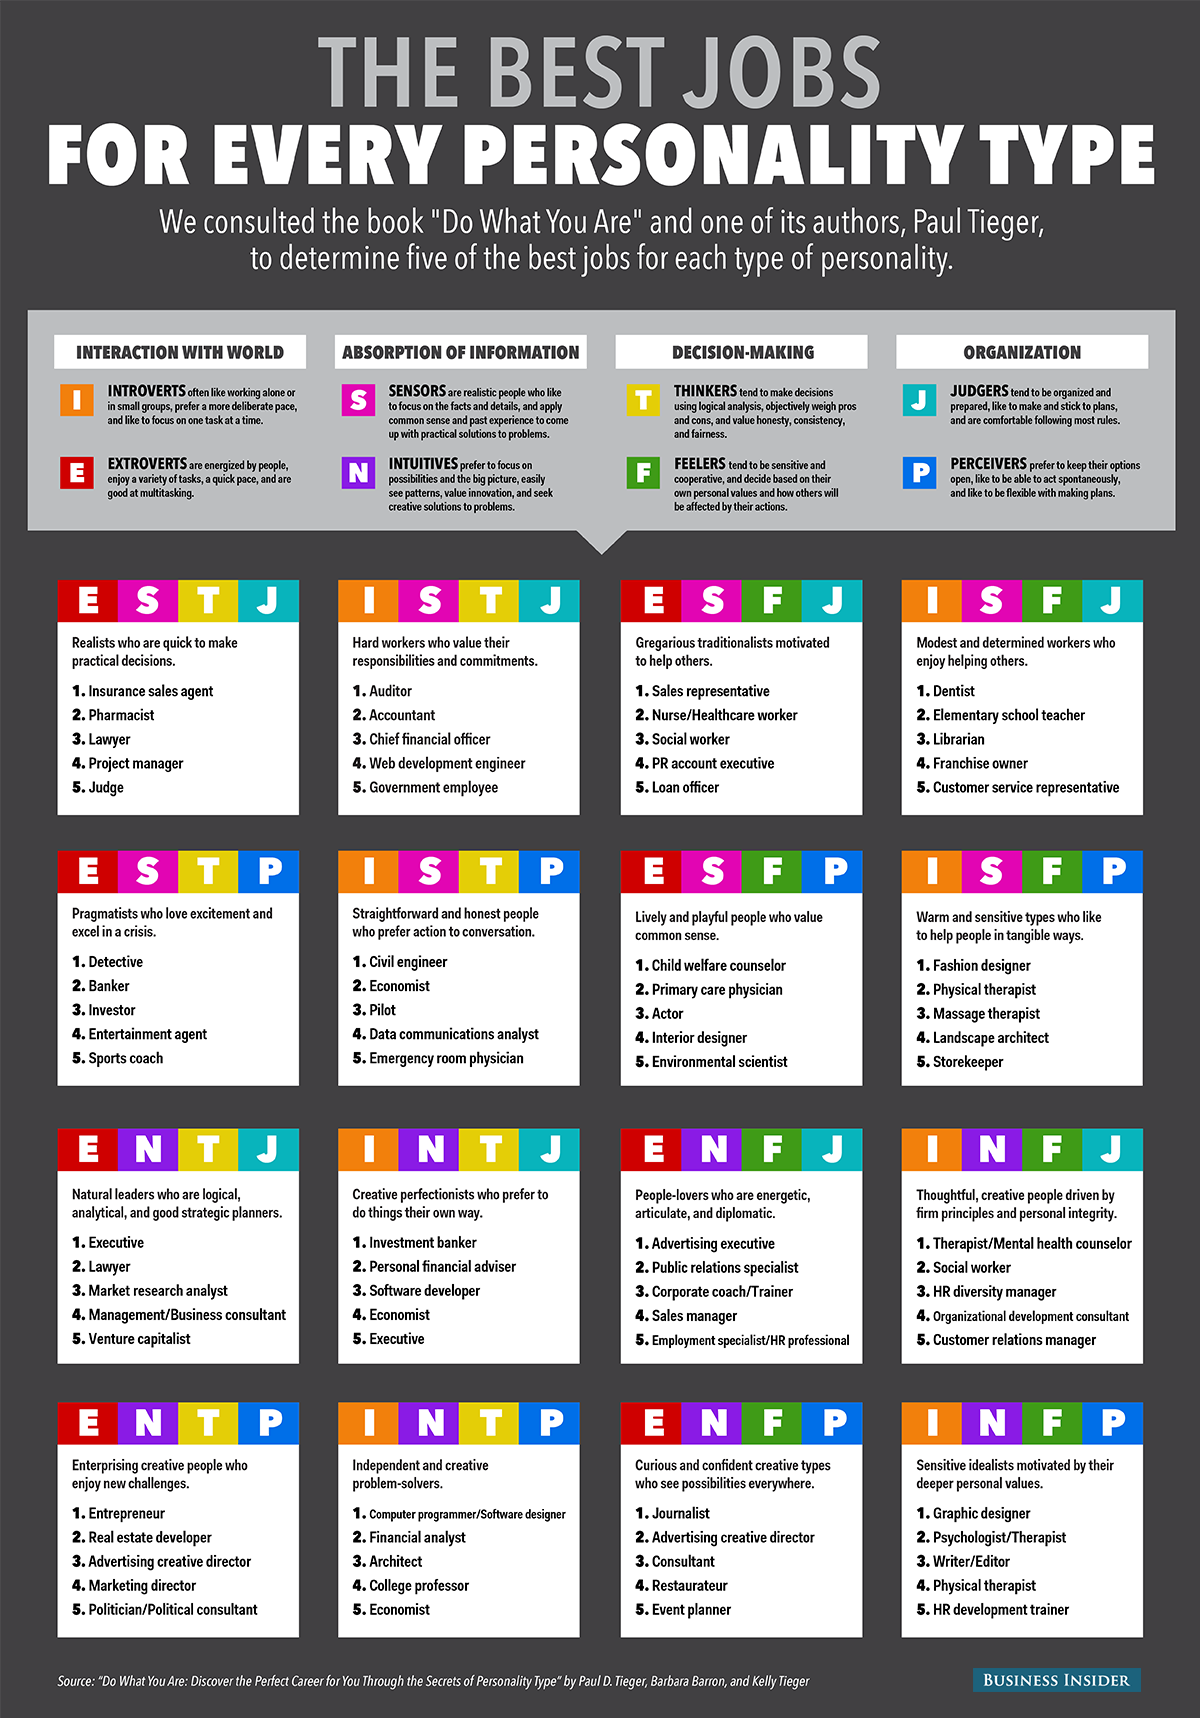 The Best Careers by MBTI Personality Type